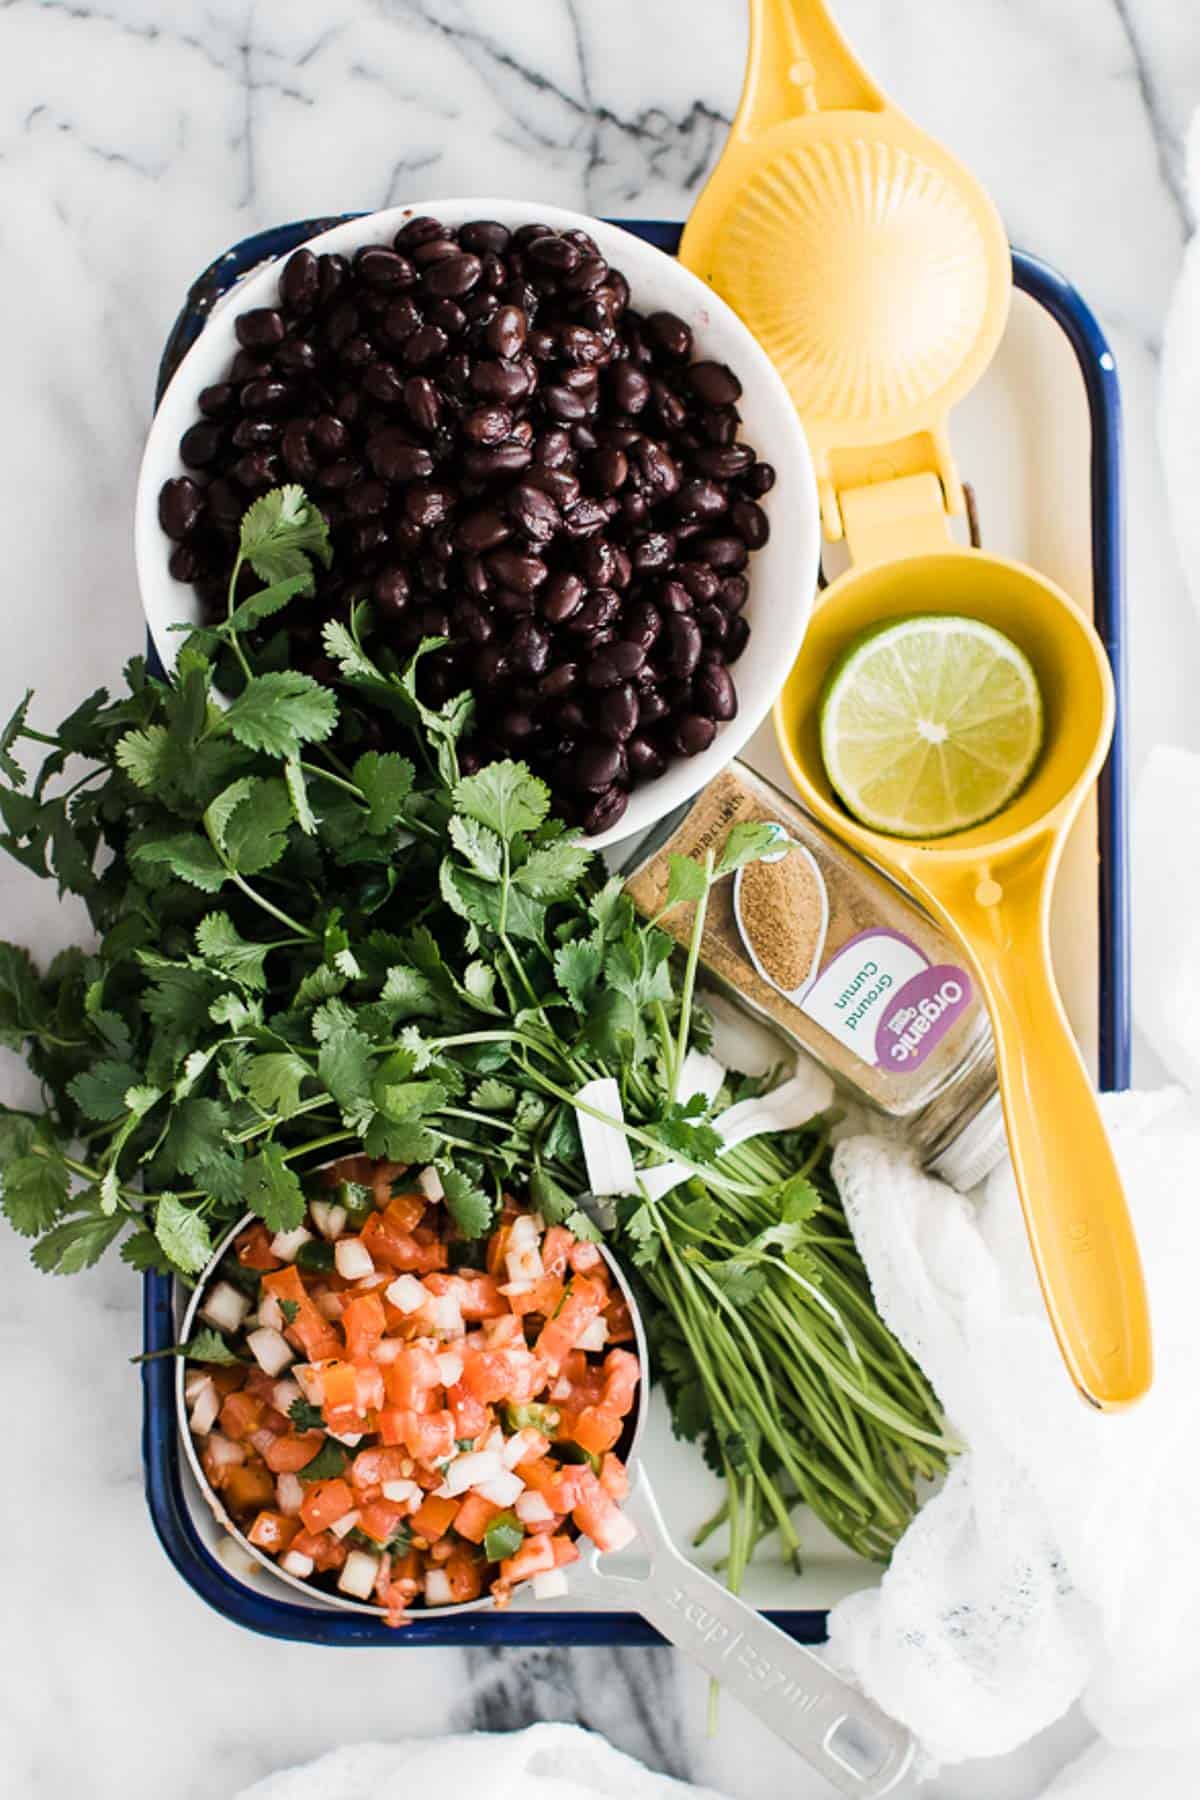 Ingredients for black bean dip on a baking tray.